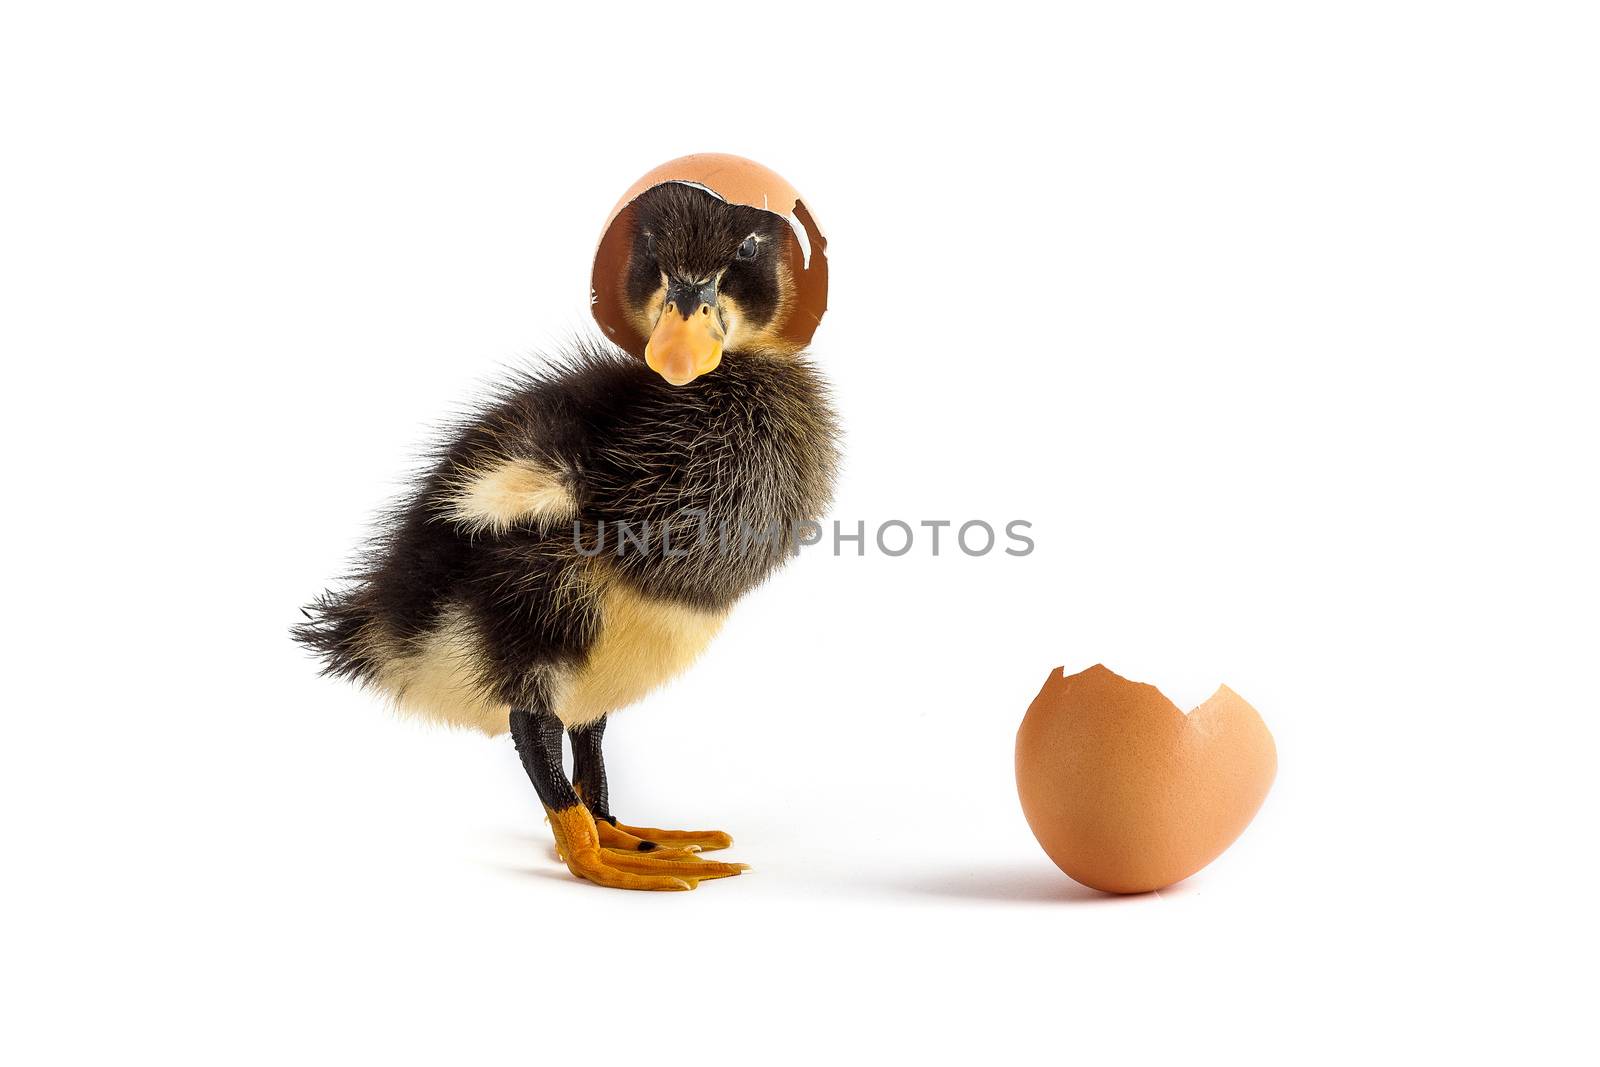 Black small duckling with egg isolated on a white background